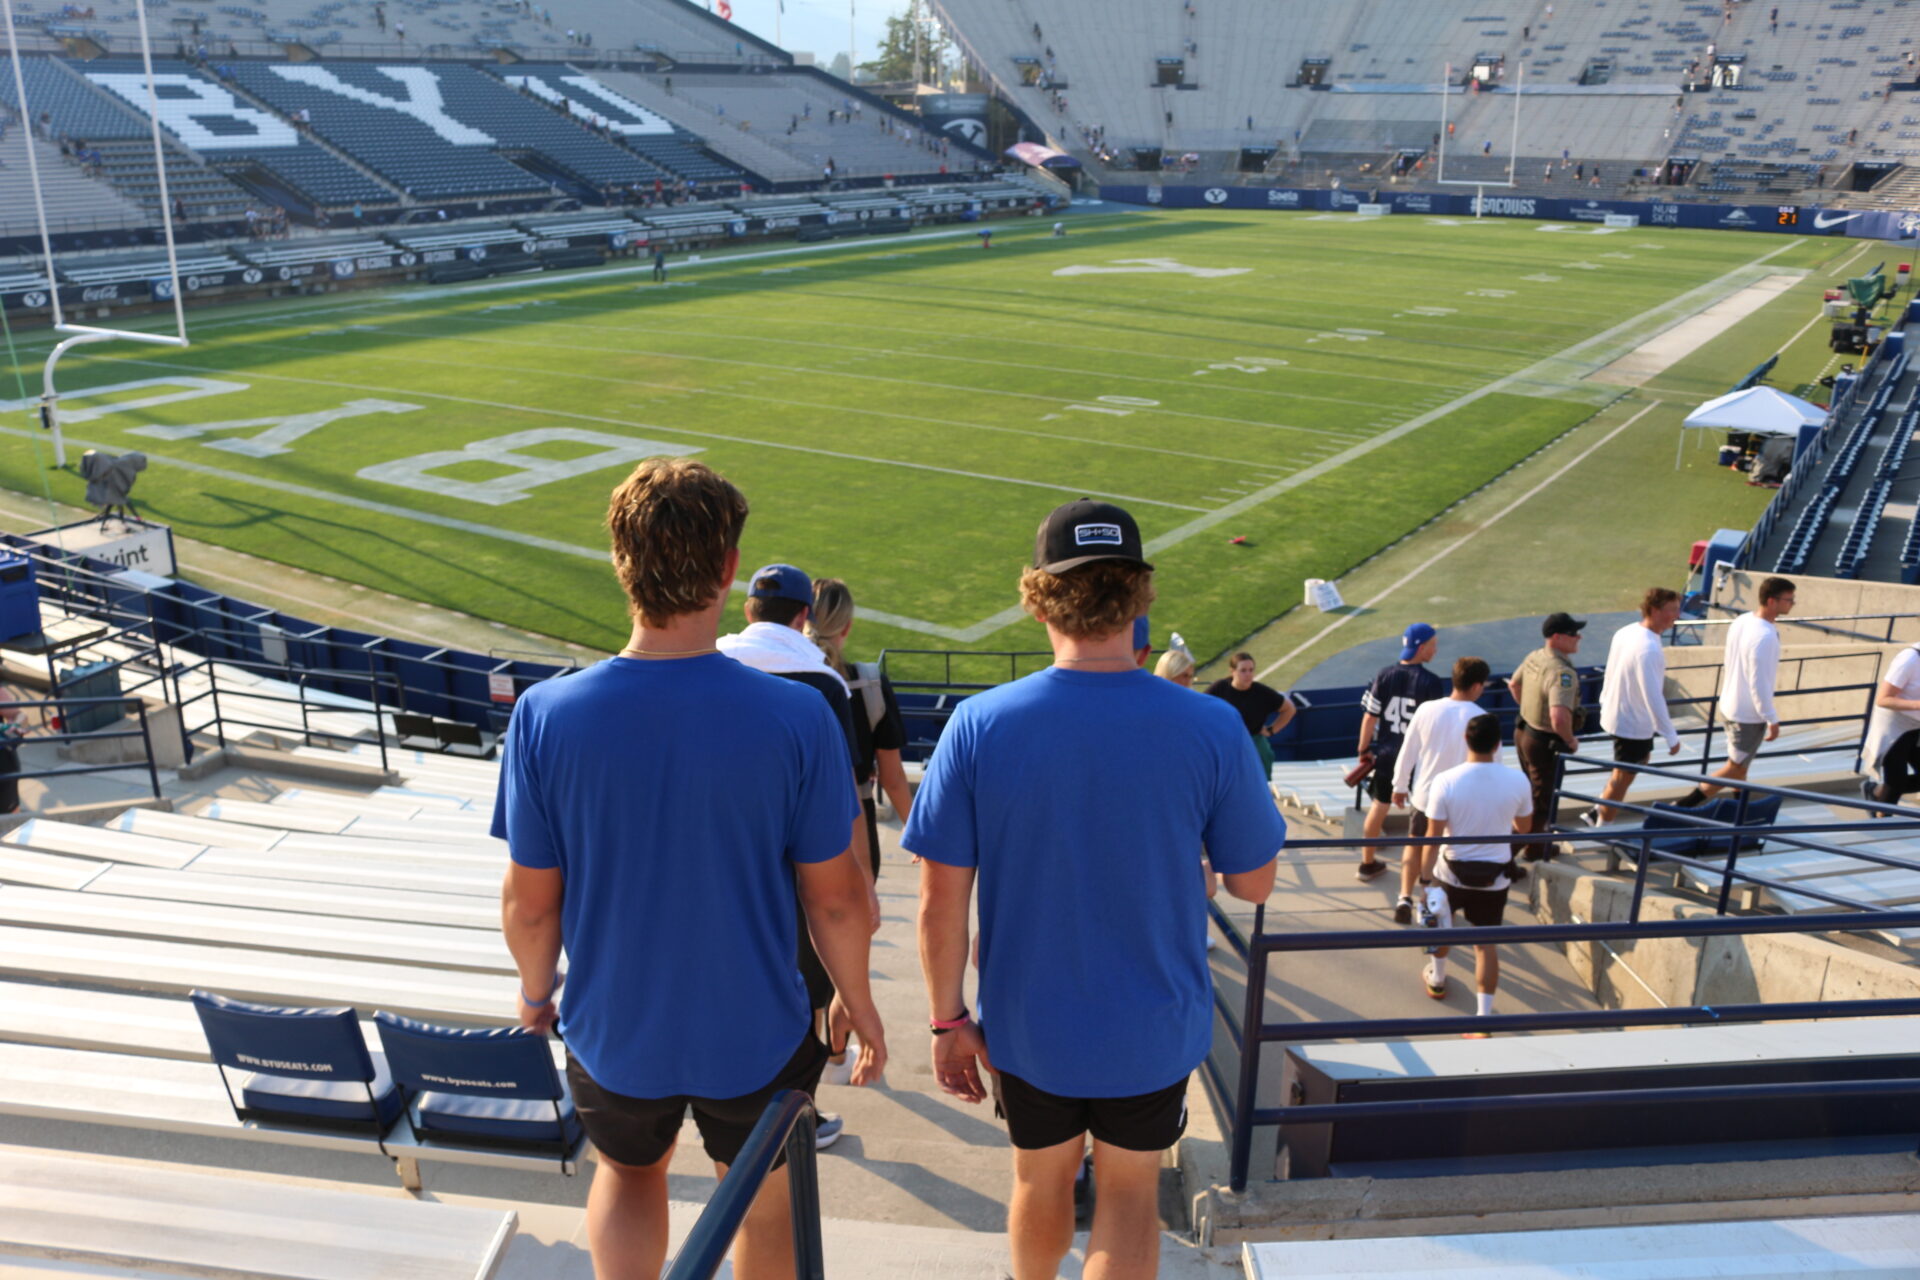 New clear bag policy for LaVell Edwards Stadium - The Daily Universe